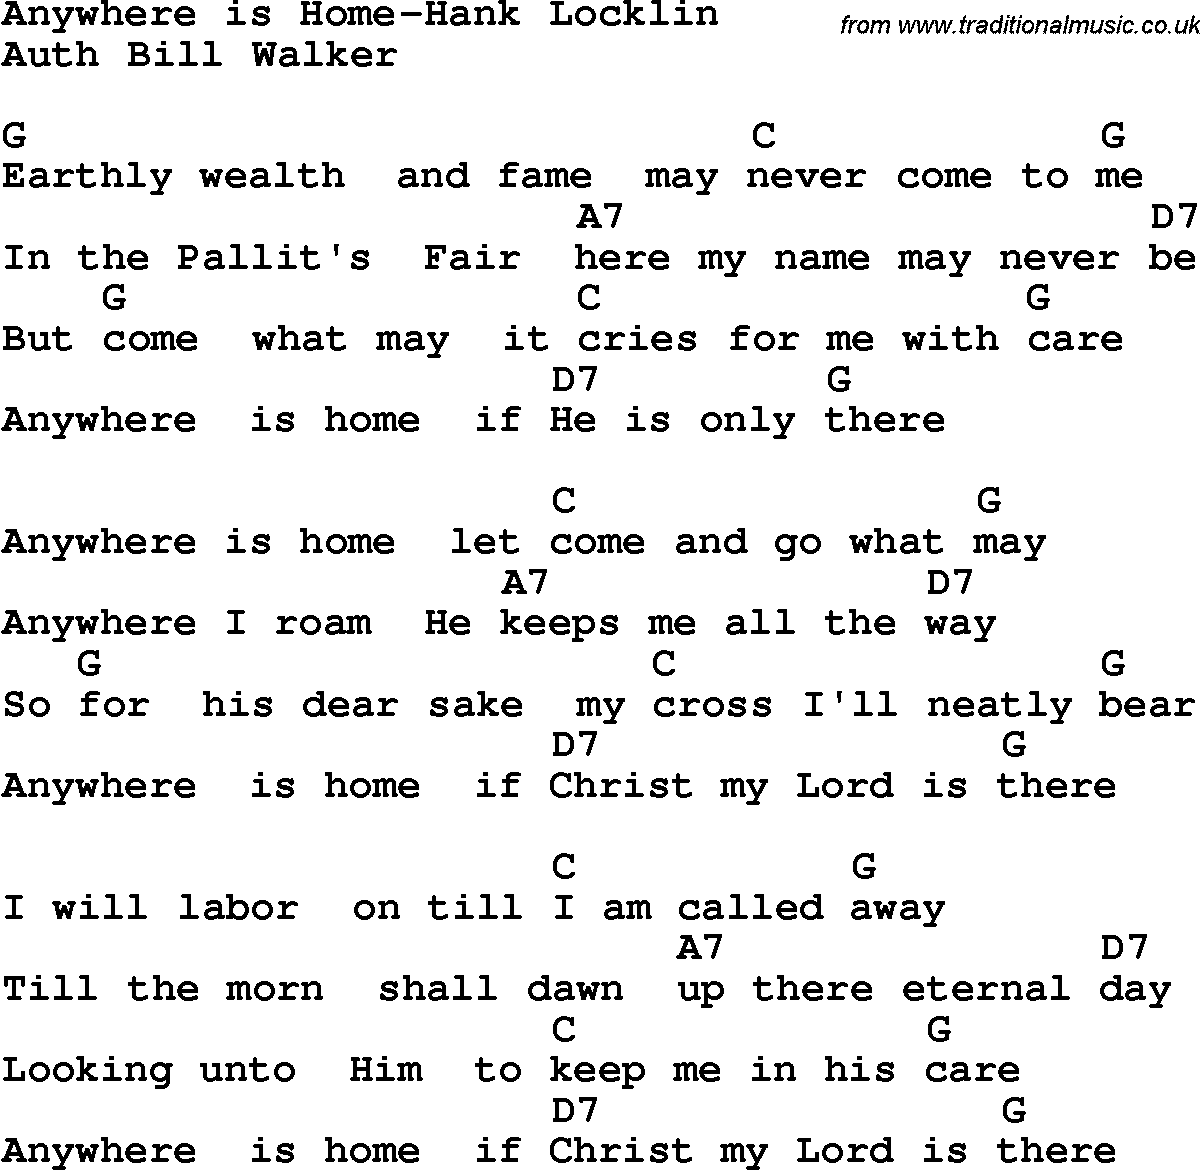 Country, Southern and Bluegrass Gospel Song Anywhere is Home-Hank Locklin lyrics and chords